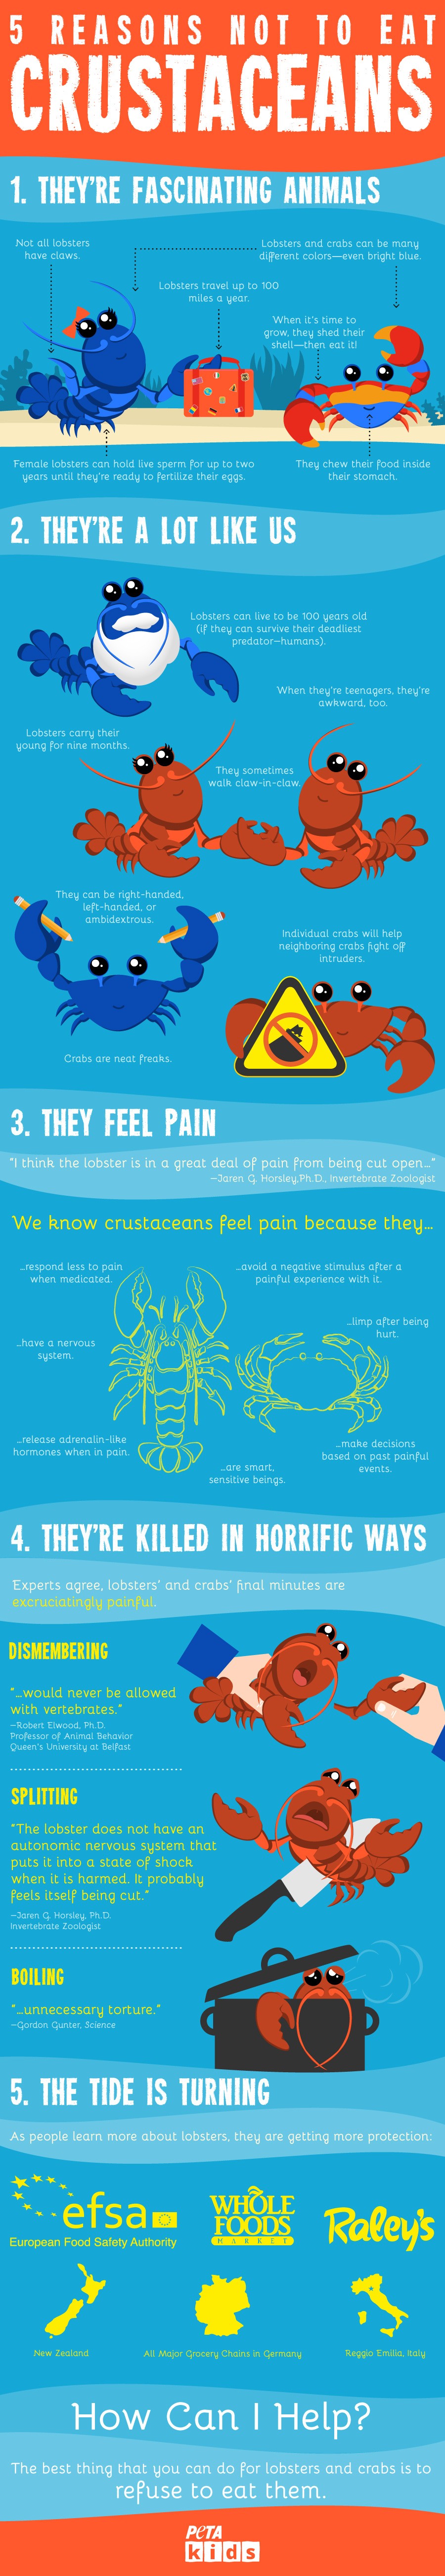 5 Reasons Not to Eat Crabs and Lobsters | PETA Kids